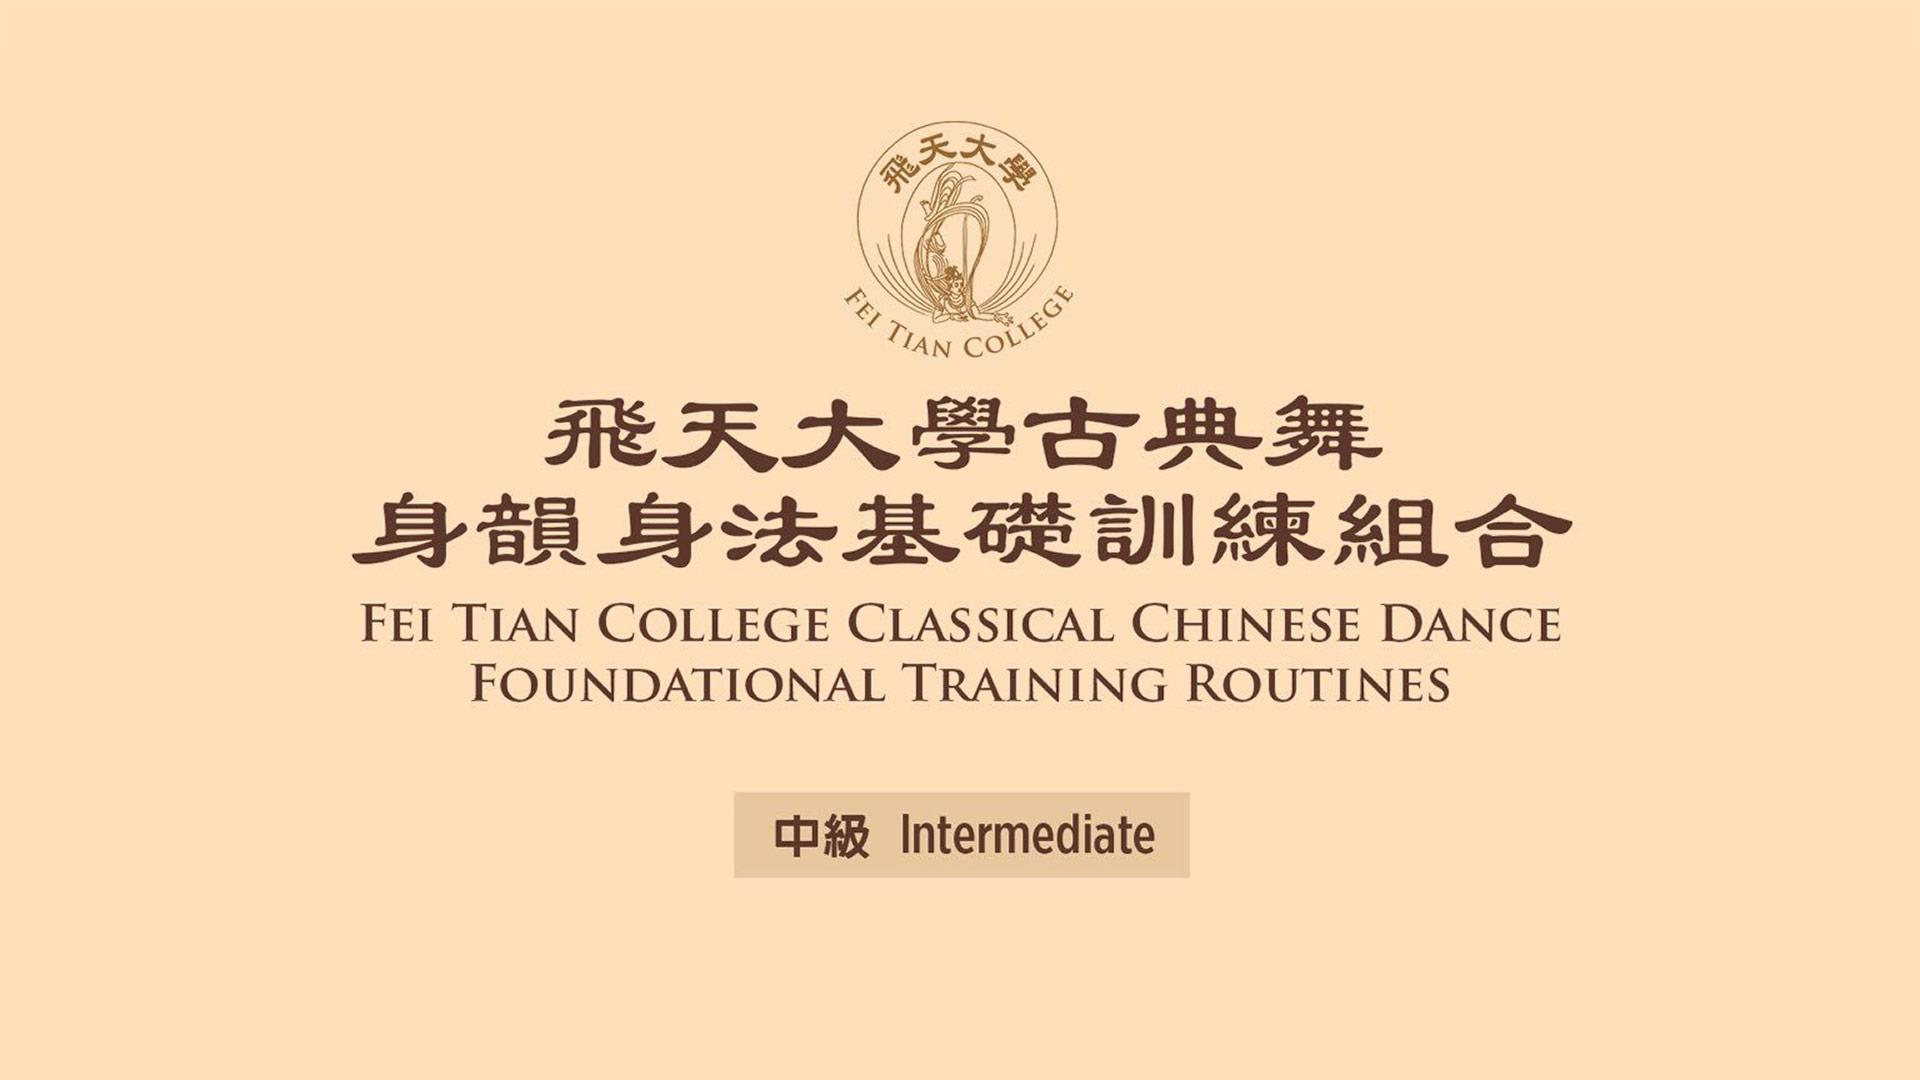 Fei Tian College Classical Chinese Dance Foundational Training Routines - Intermediate